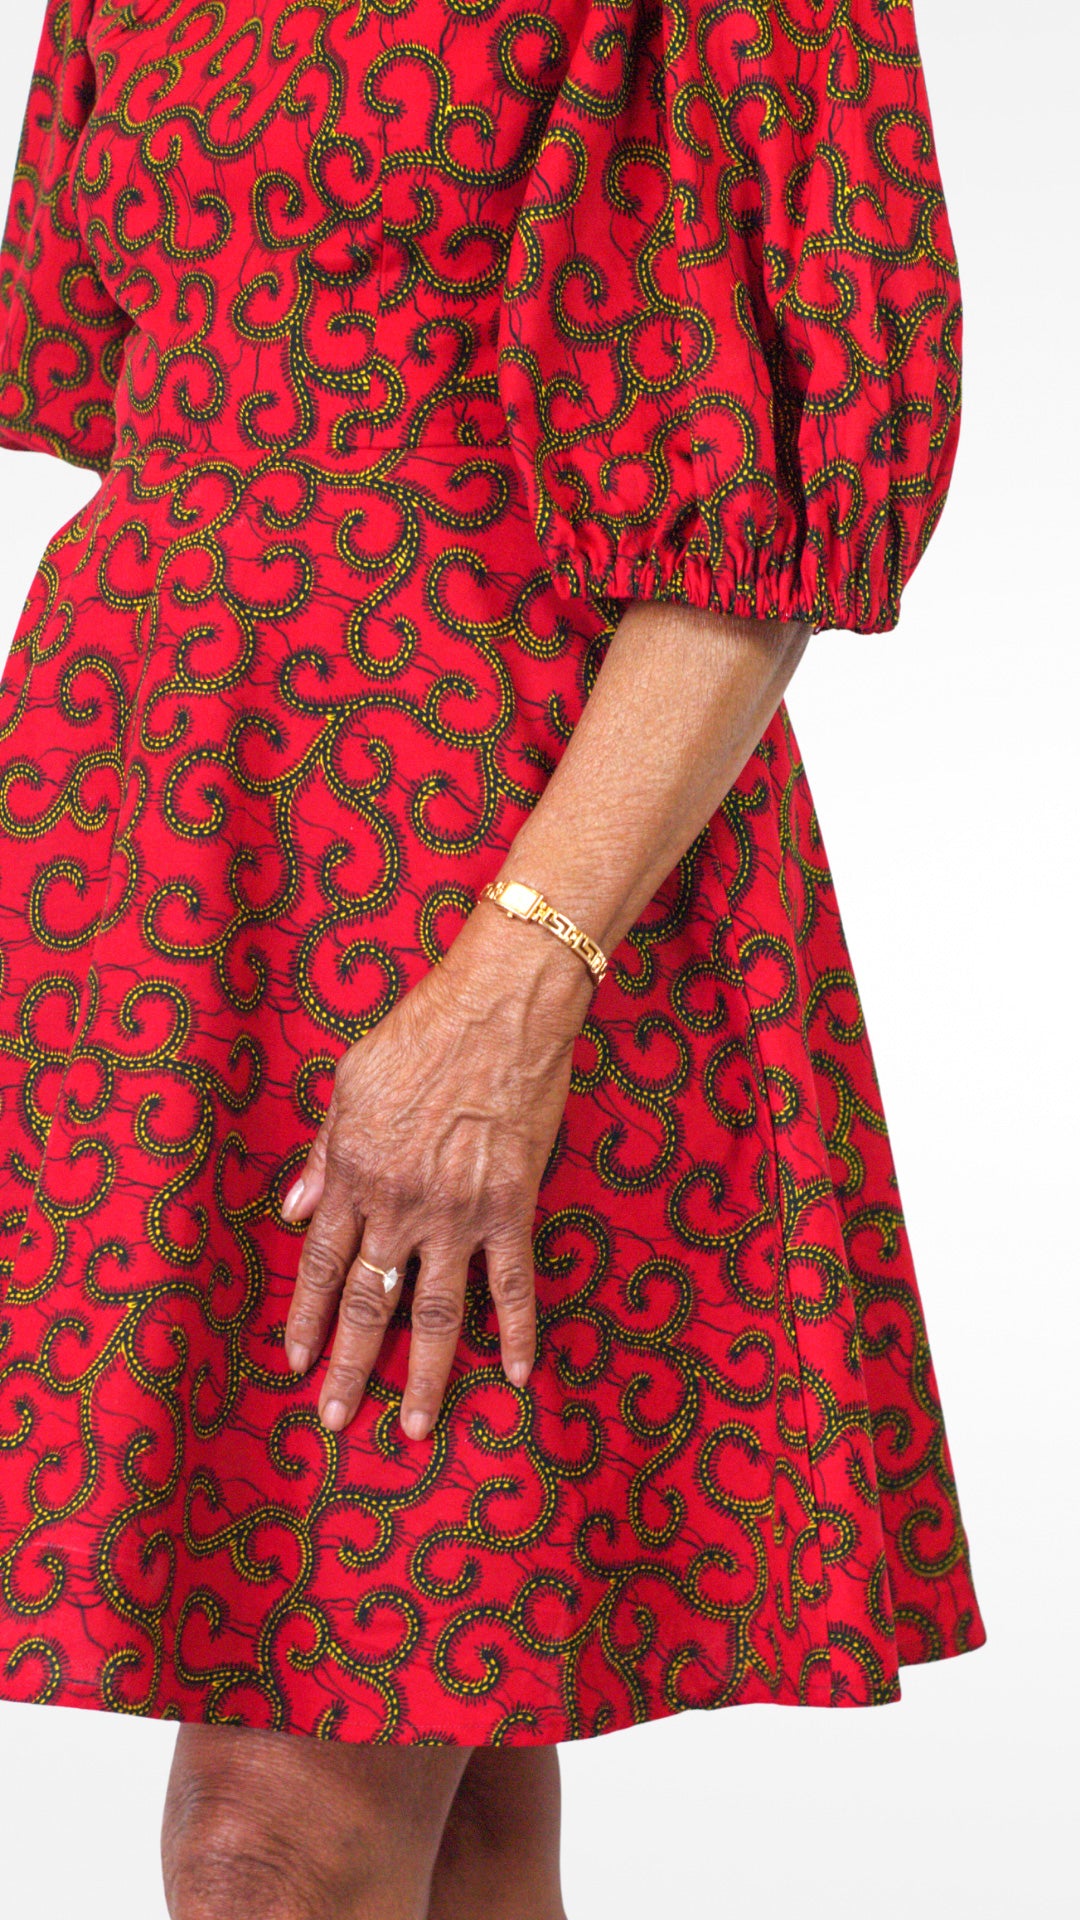 A close-up of model's hand placed on the red dress, adding a personal touch and showcasing the fabric's texture and design details.